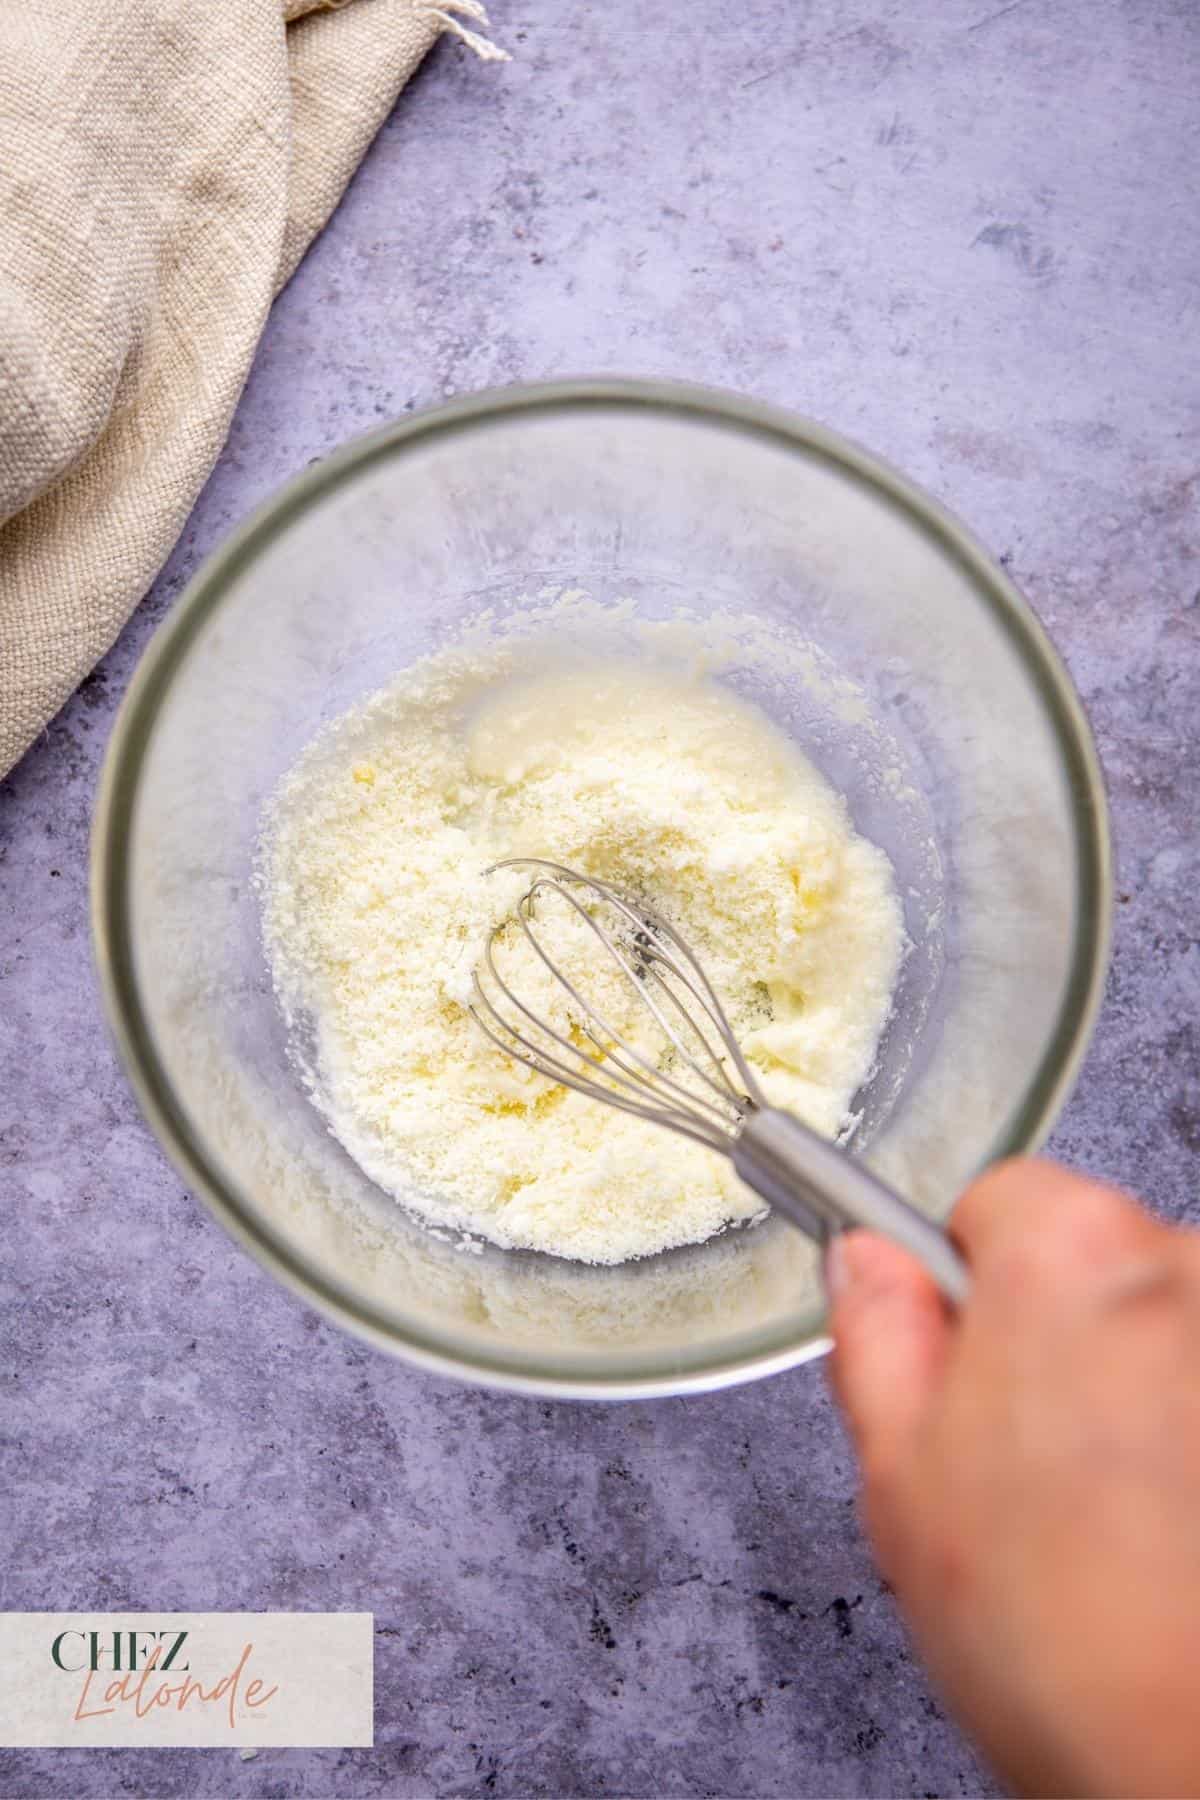 Mix pasta water and grated pecorino cheese in a glass bowl with a whisk.